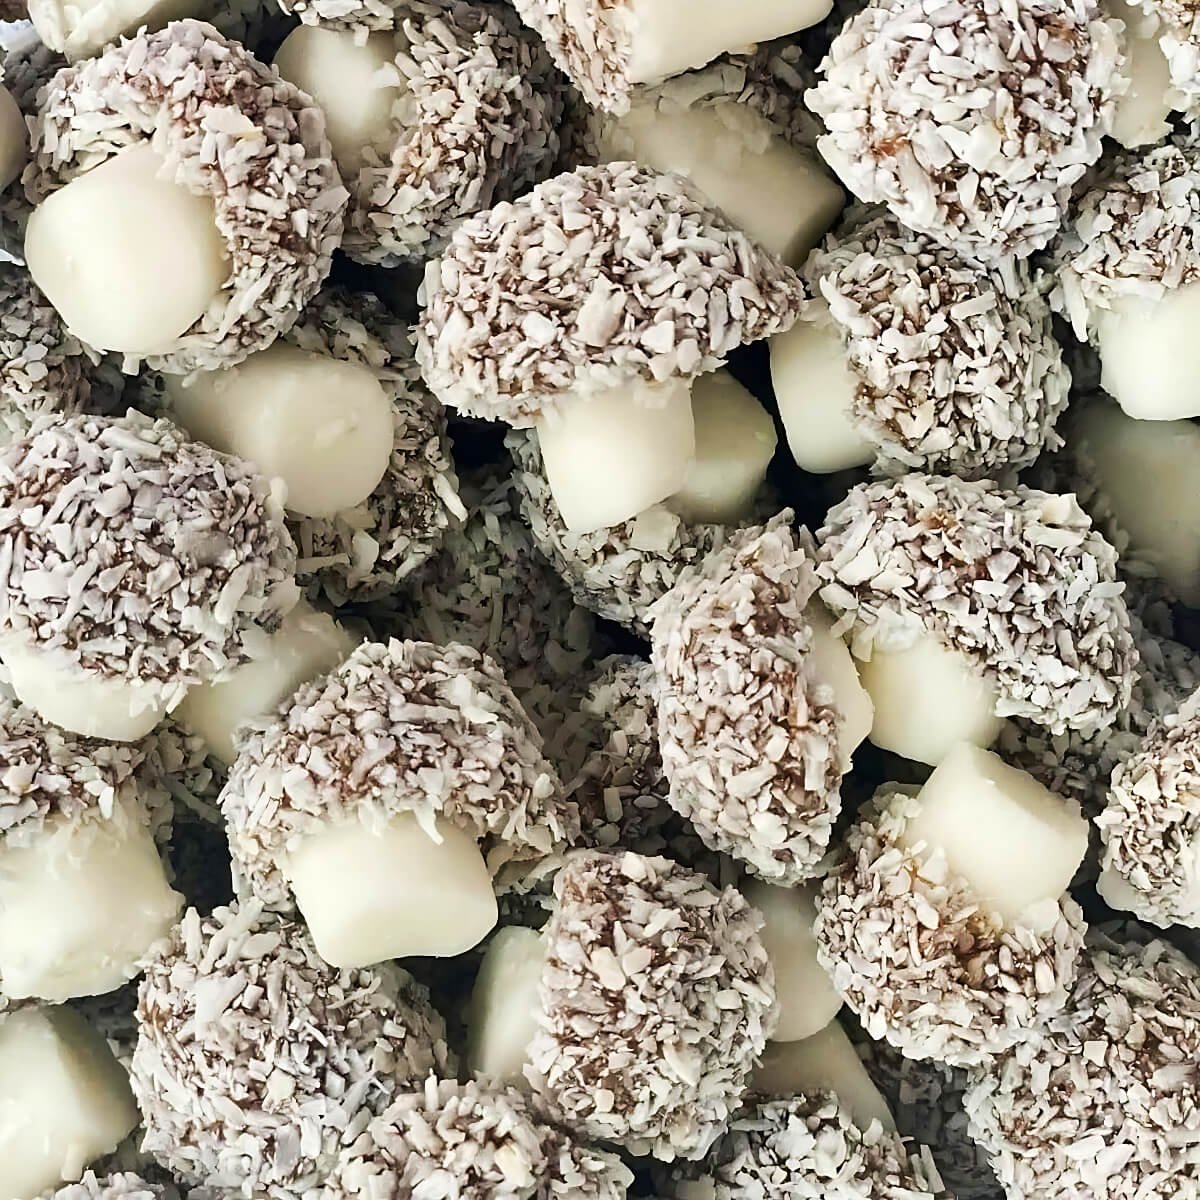 Close-up view of loose coconut mushrooms sweets